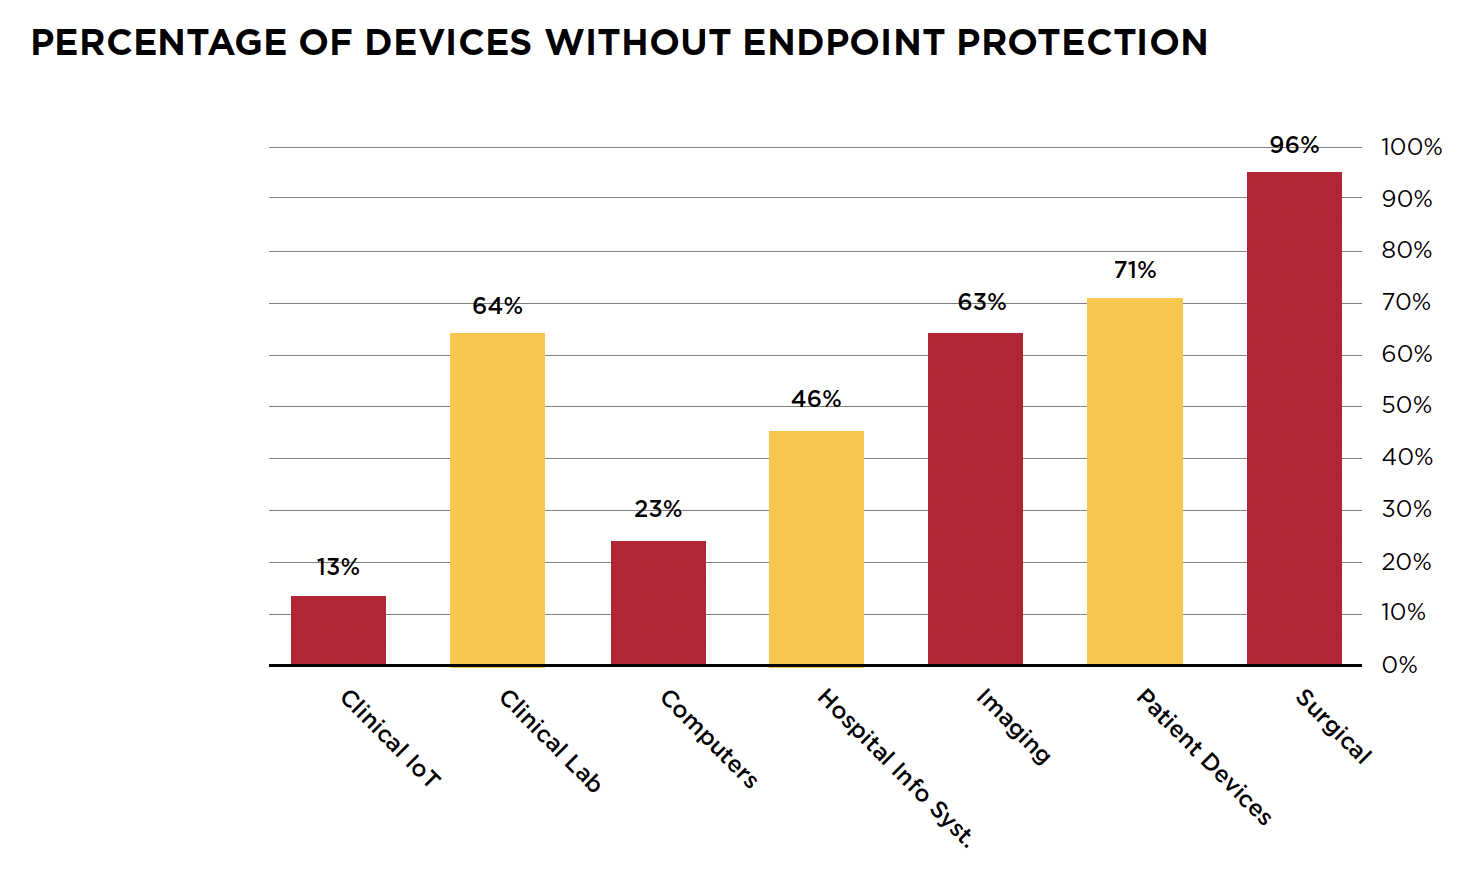 A graph of devices without endpoint protection

Description automatically generated